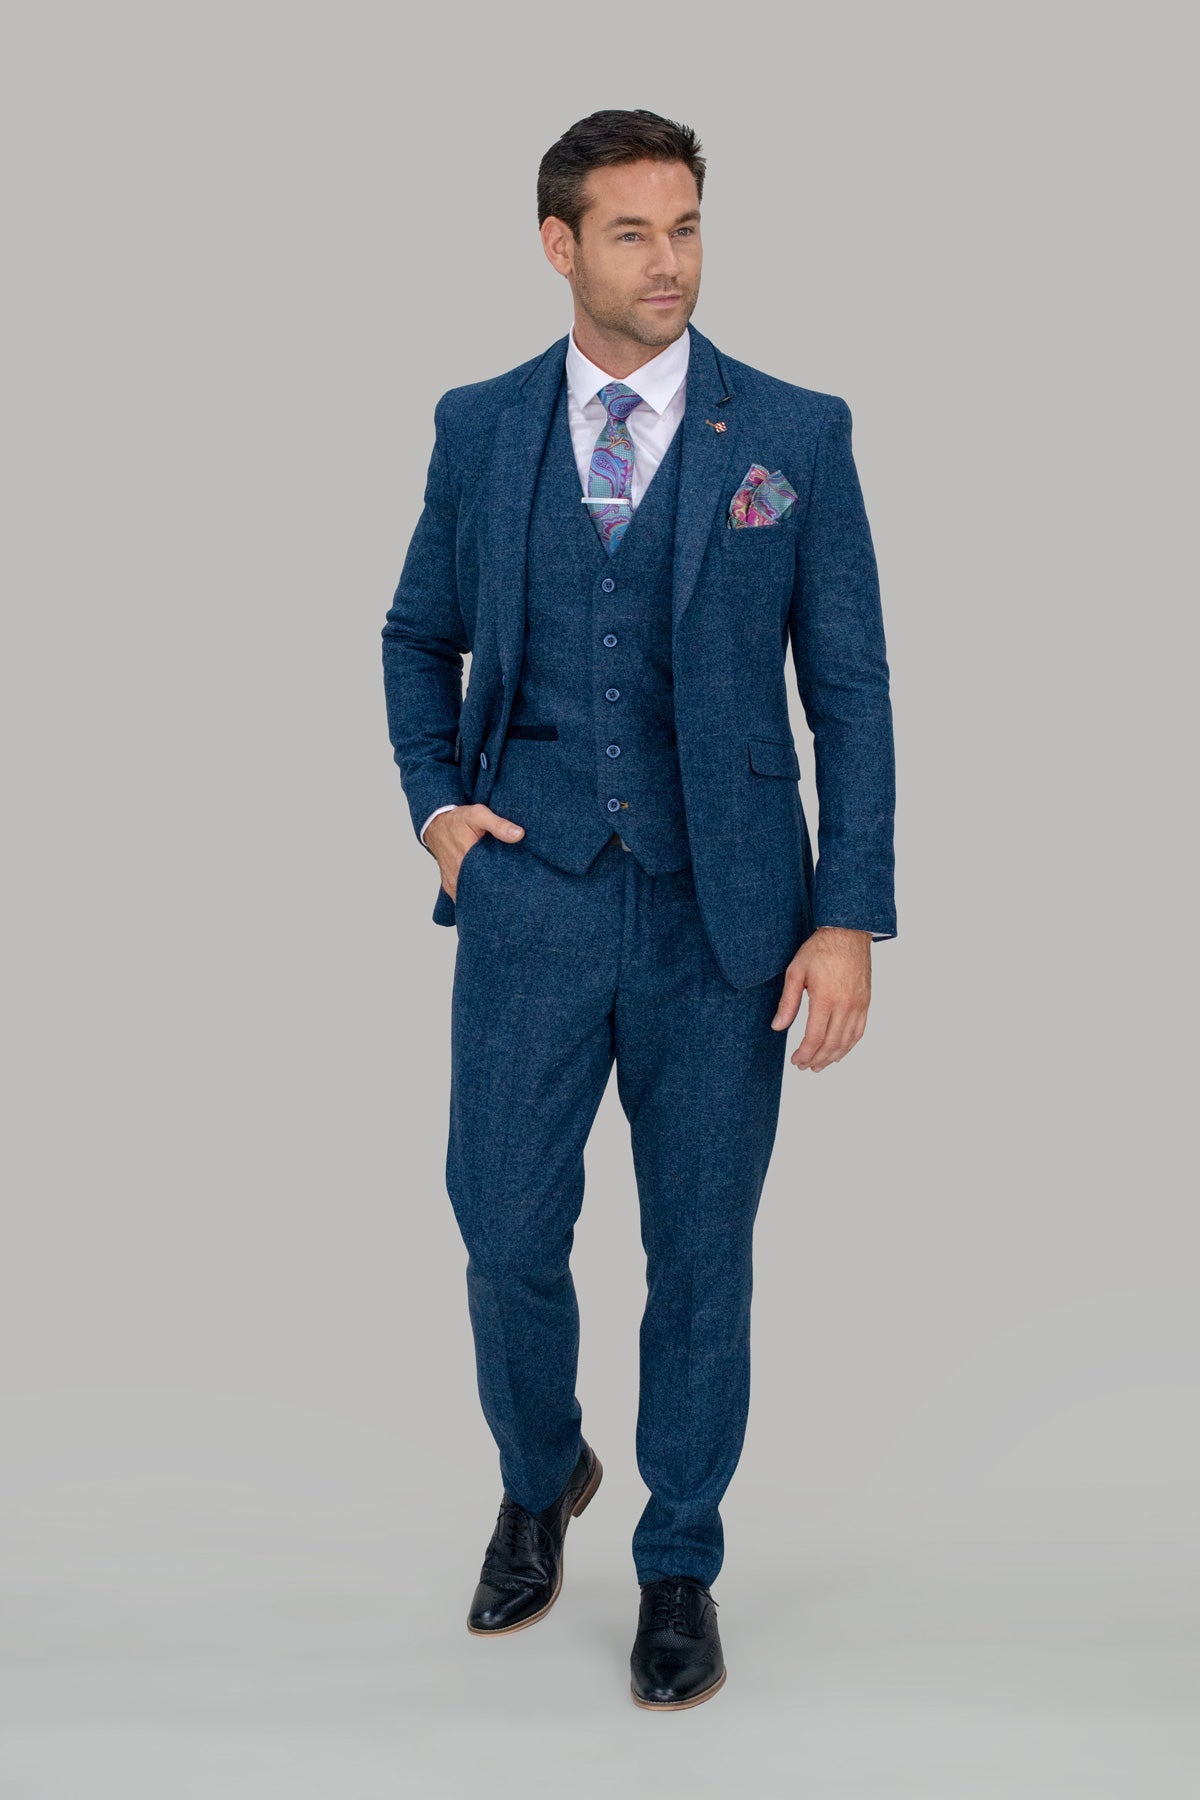 Carnegi Navy Tweed 3 Piece Wedding Suit - Suits - - Swagger & Swoon